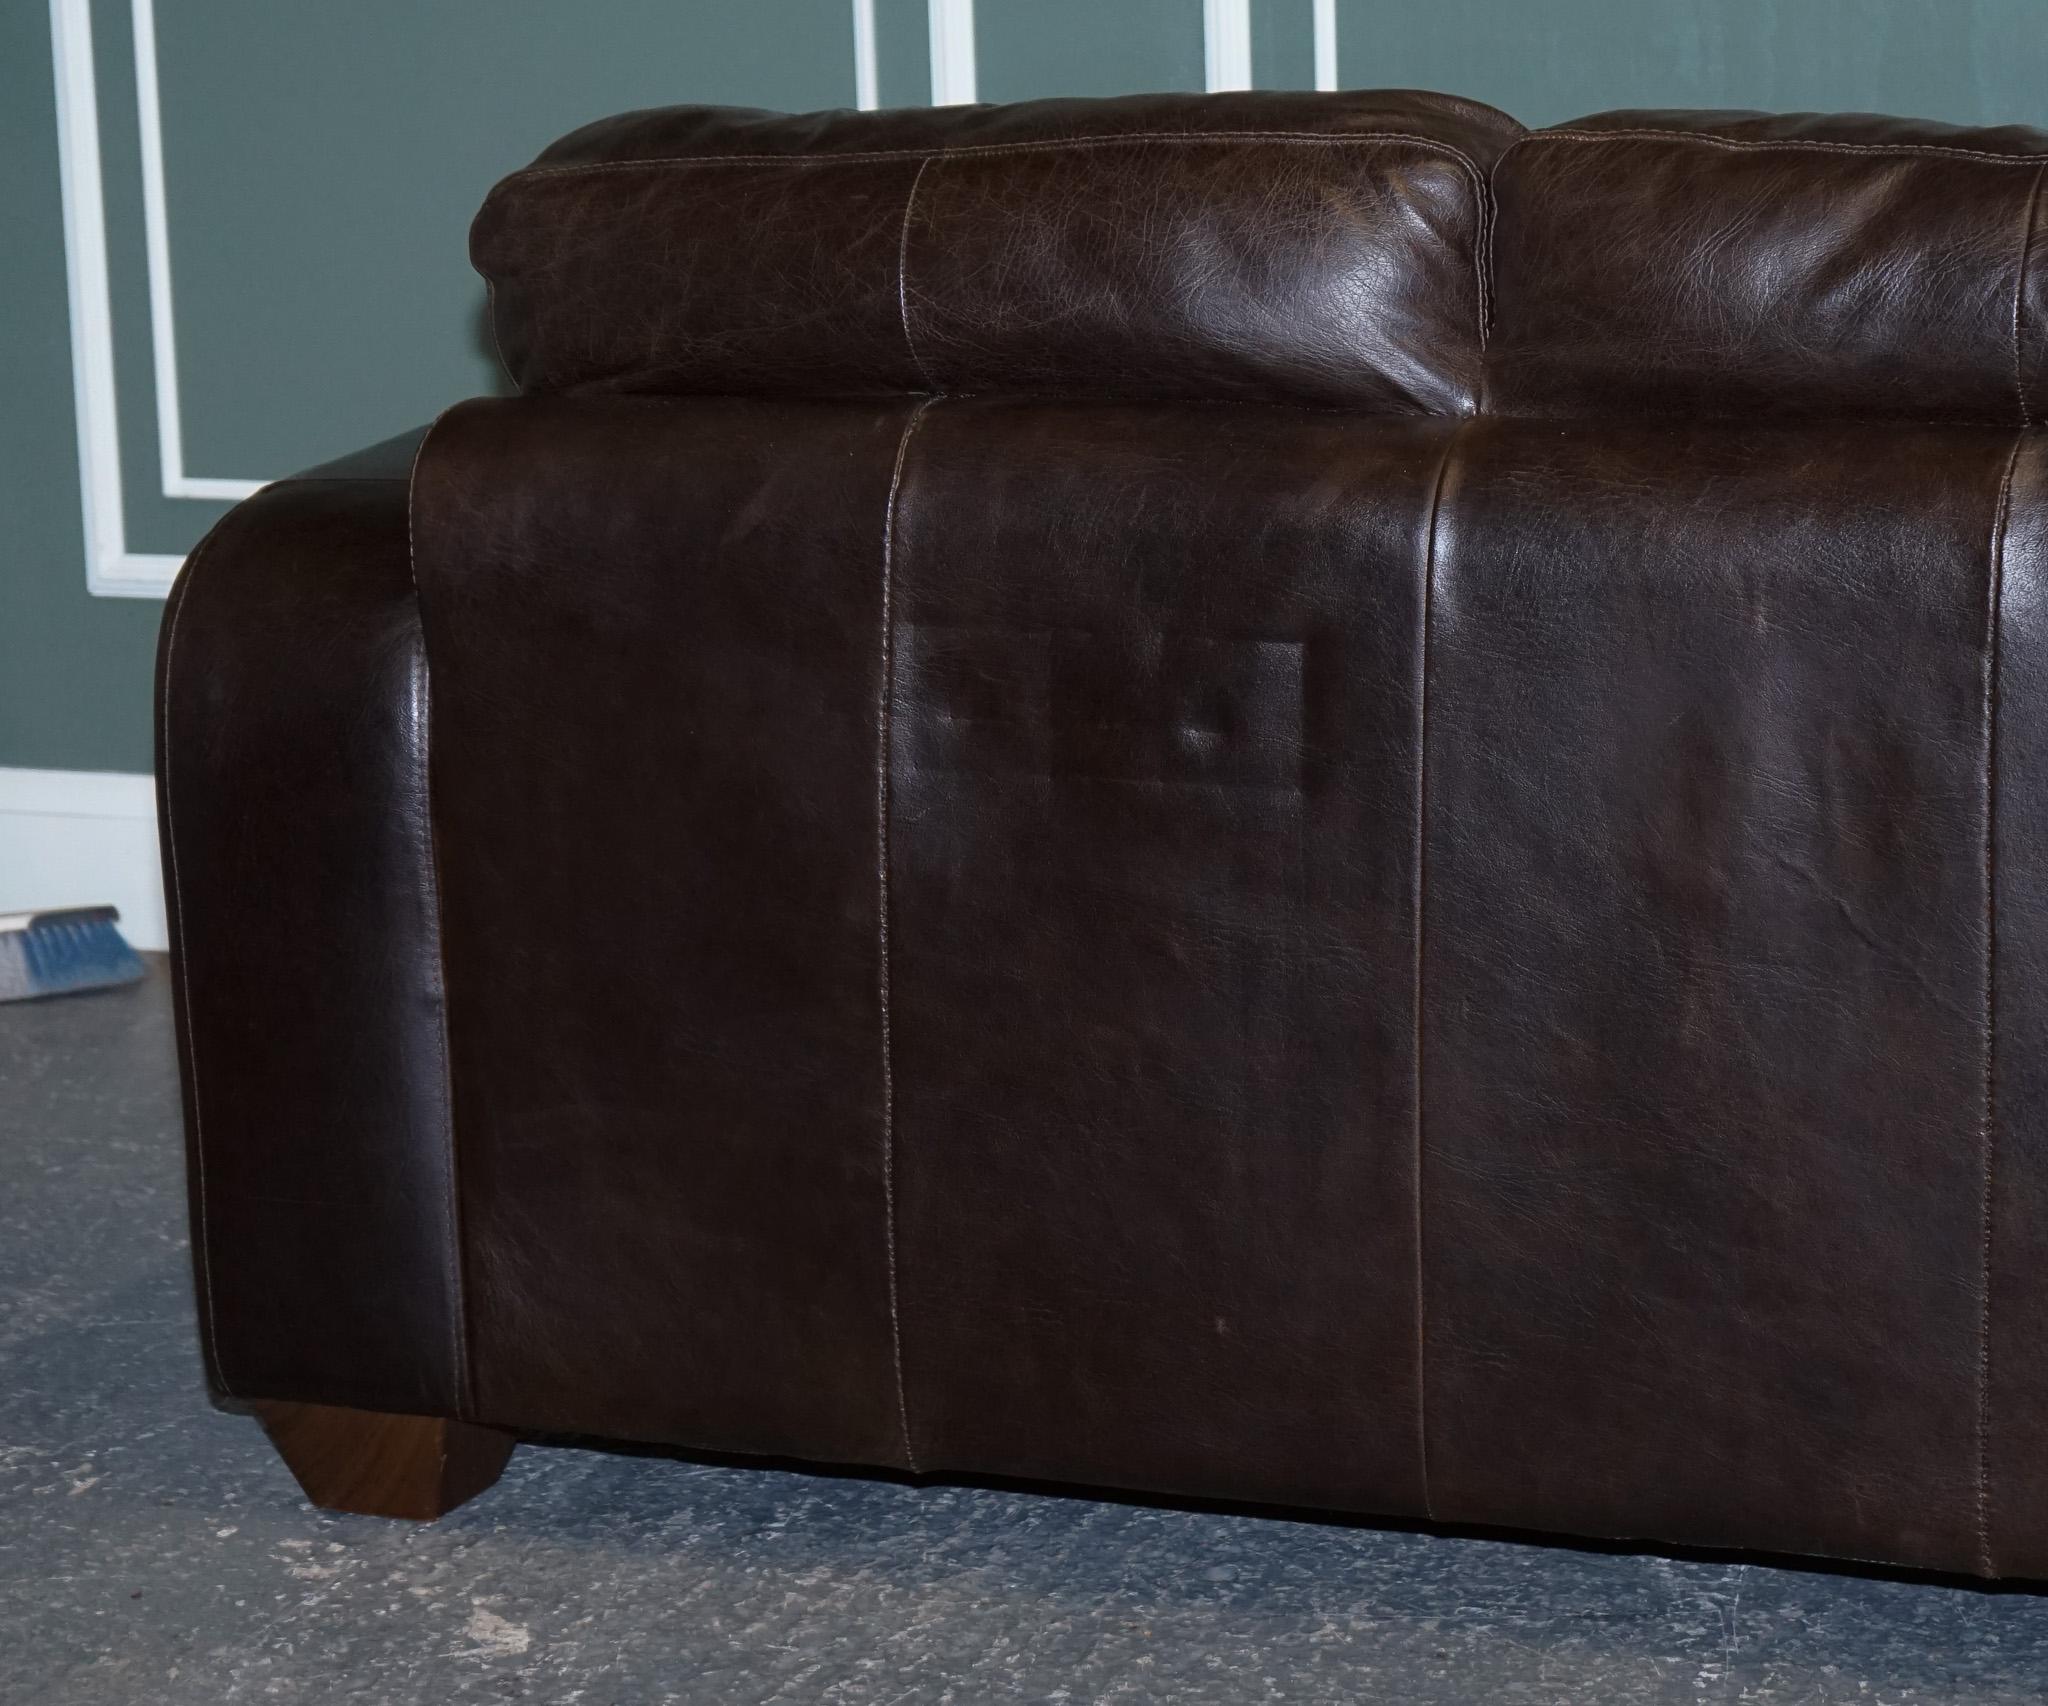 STUNNING VINTAGE CHOCOLATE BROWN LEATHER THREE SEATER SOFA BY SOFITALiA For Sale 8